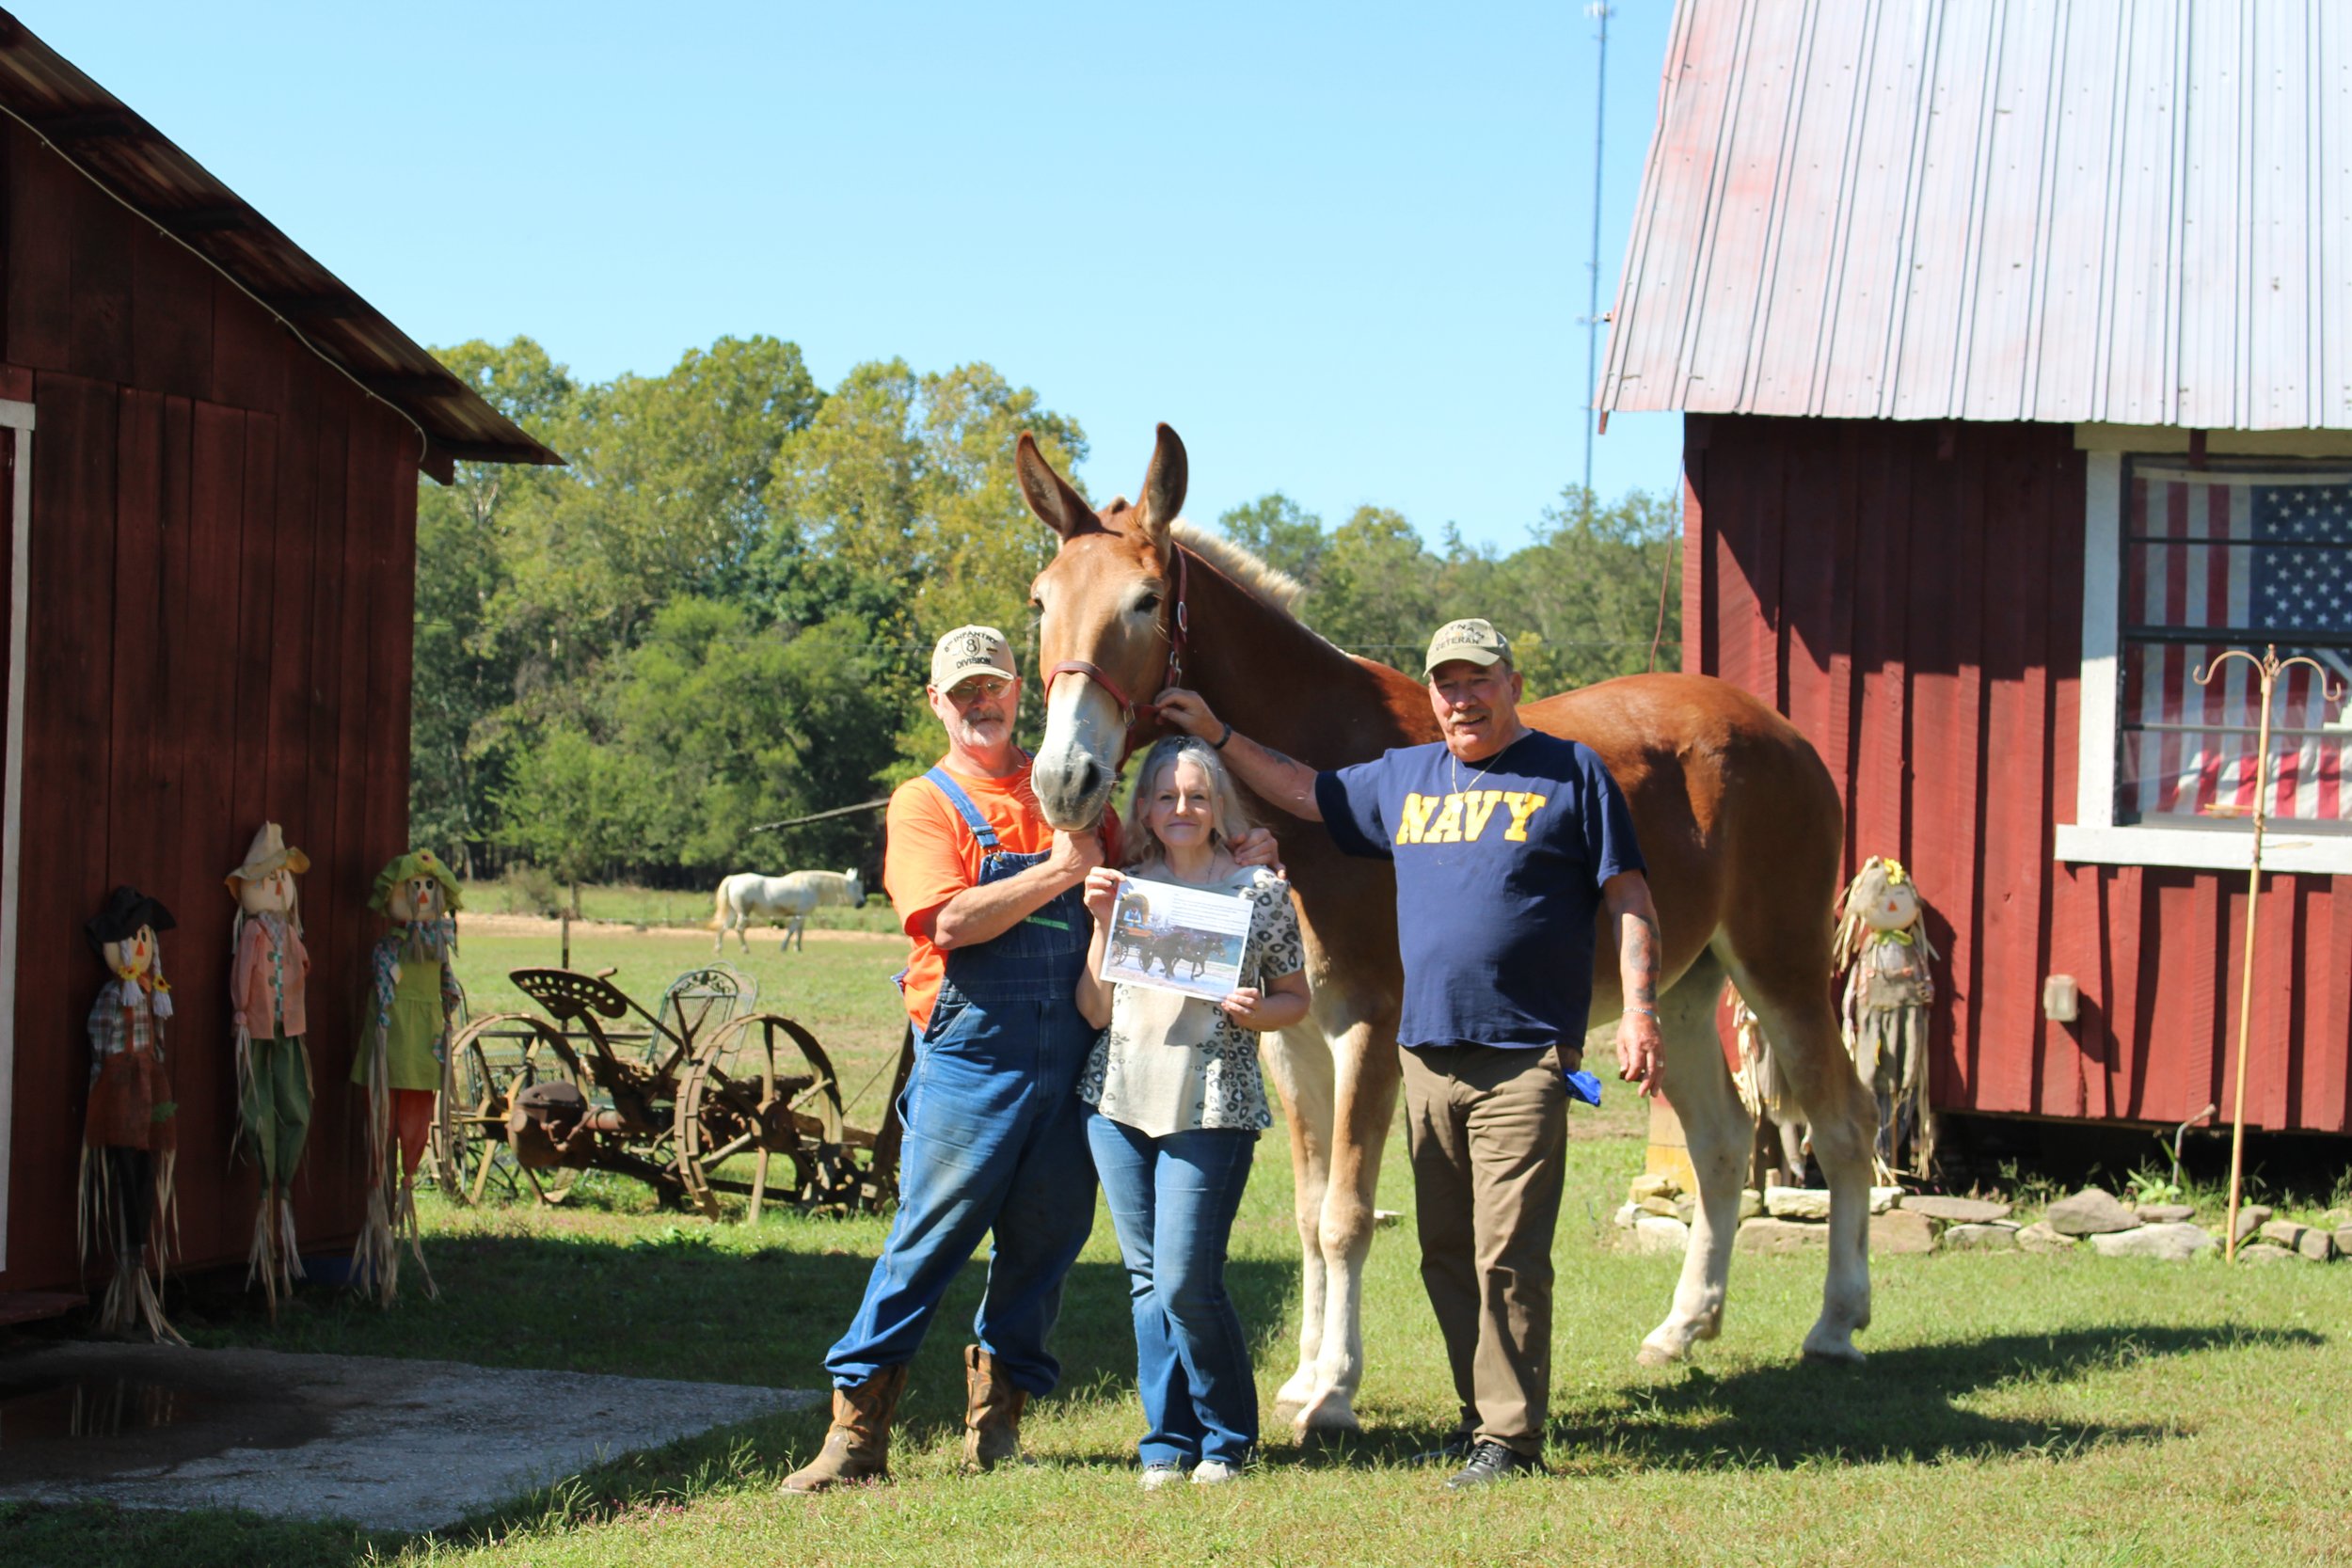  Casey visits with Johnny Smith and wife Brenda, owners of the Sugar Creek Carriage Company in Nashville, TN 10.12.2021 and to talk over shoeing the Big Boys like this Draft Mule Pearl. 